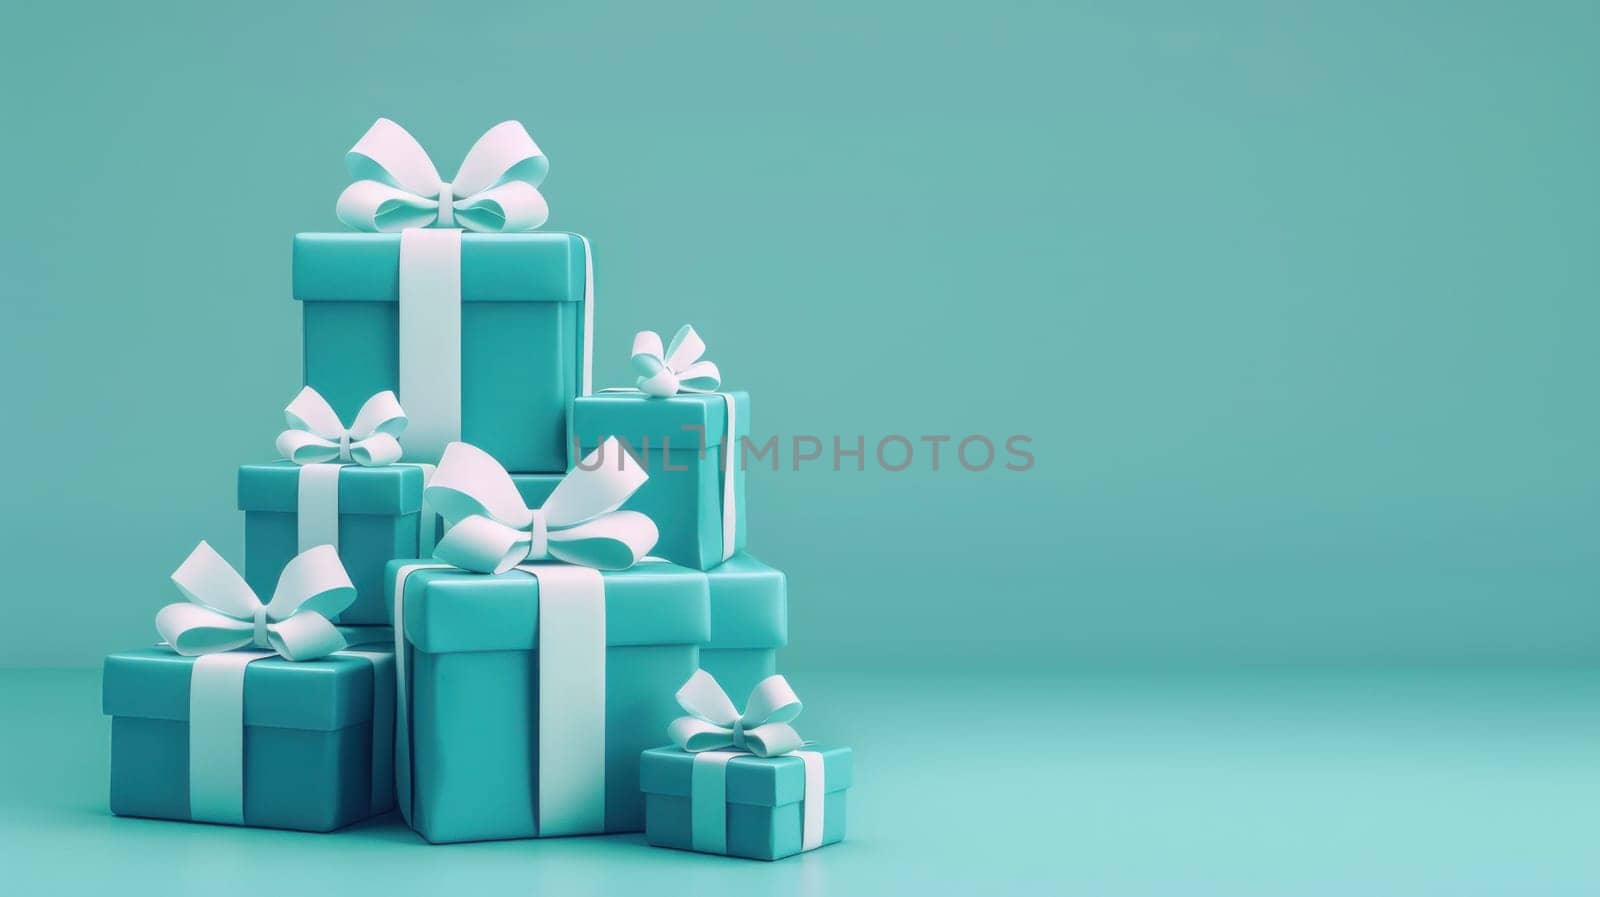 Three blue gift boxes with white ribbons on a turquoise background 3d rendering for travel, business, and fashion themes by Vichizh